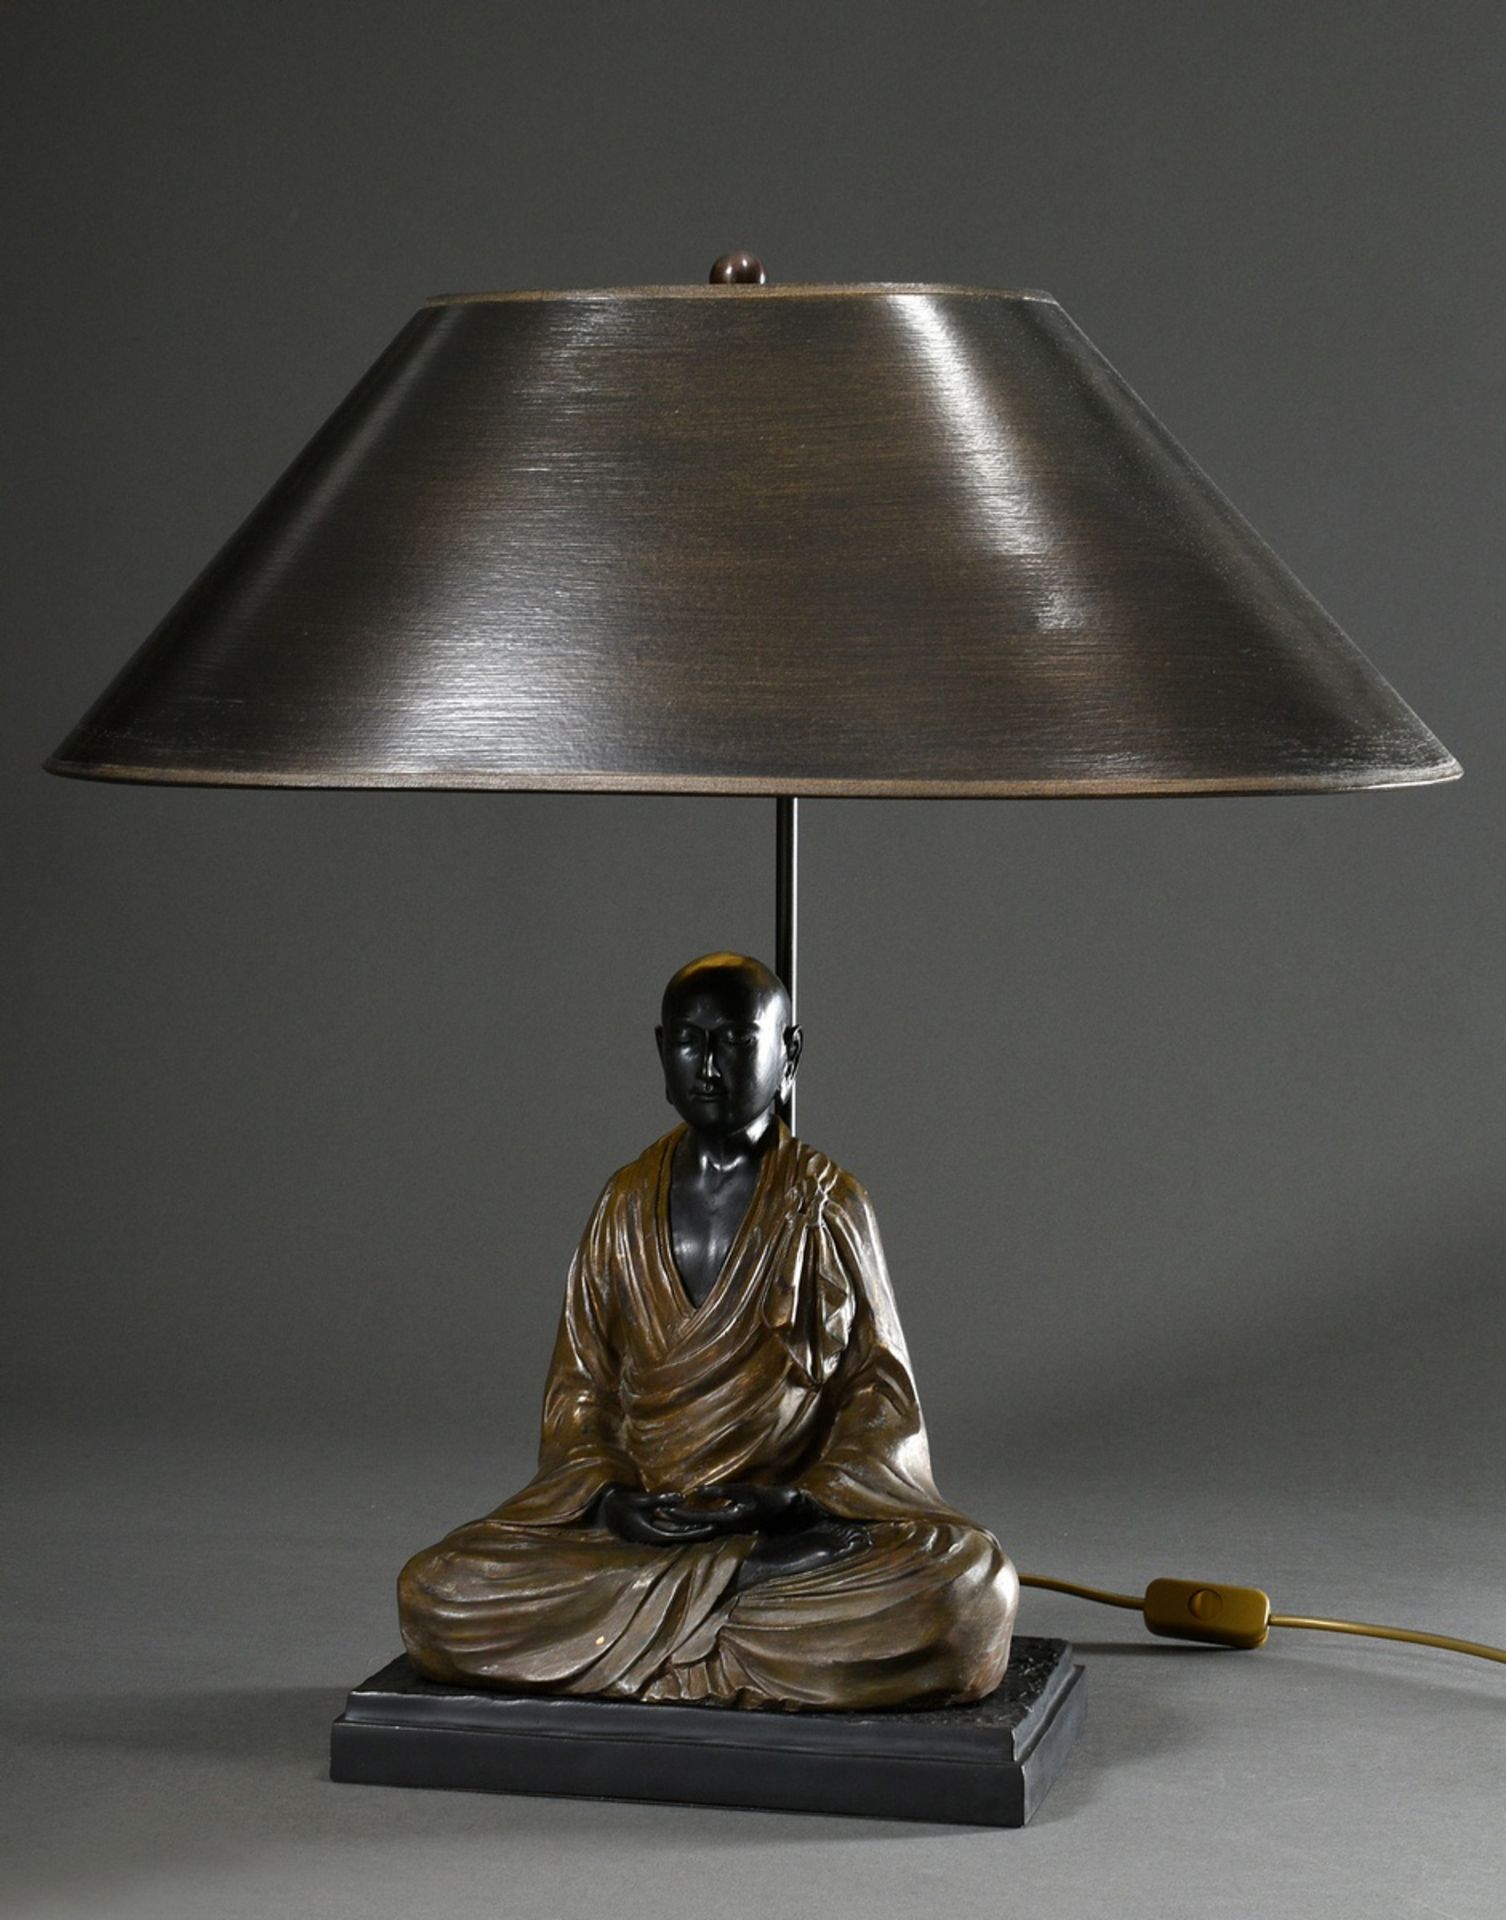 Modern table lamp with Asian figure "Meditating monk", painted metal, probably China 20th c., h. 63